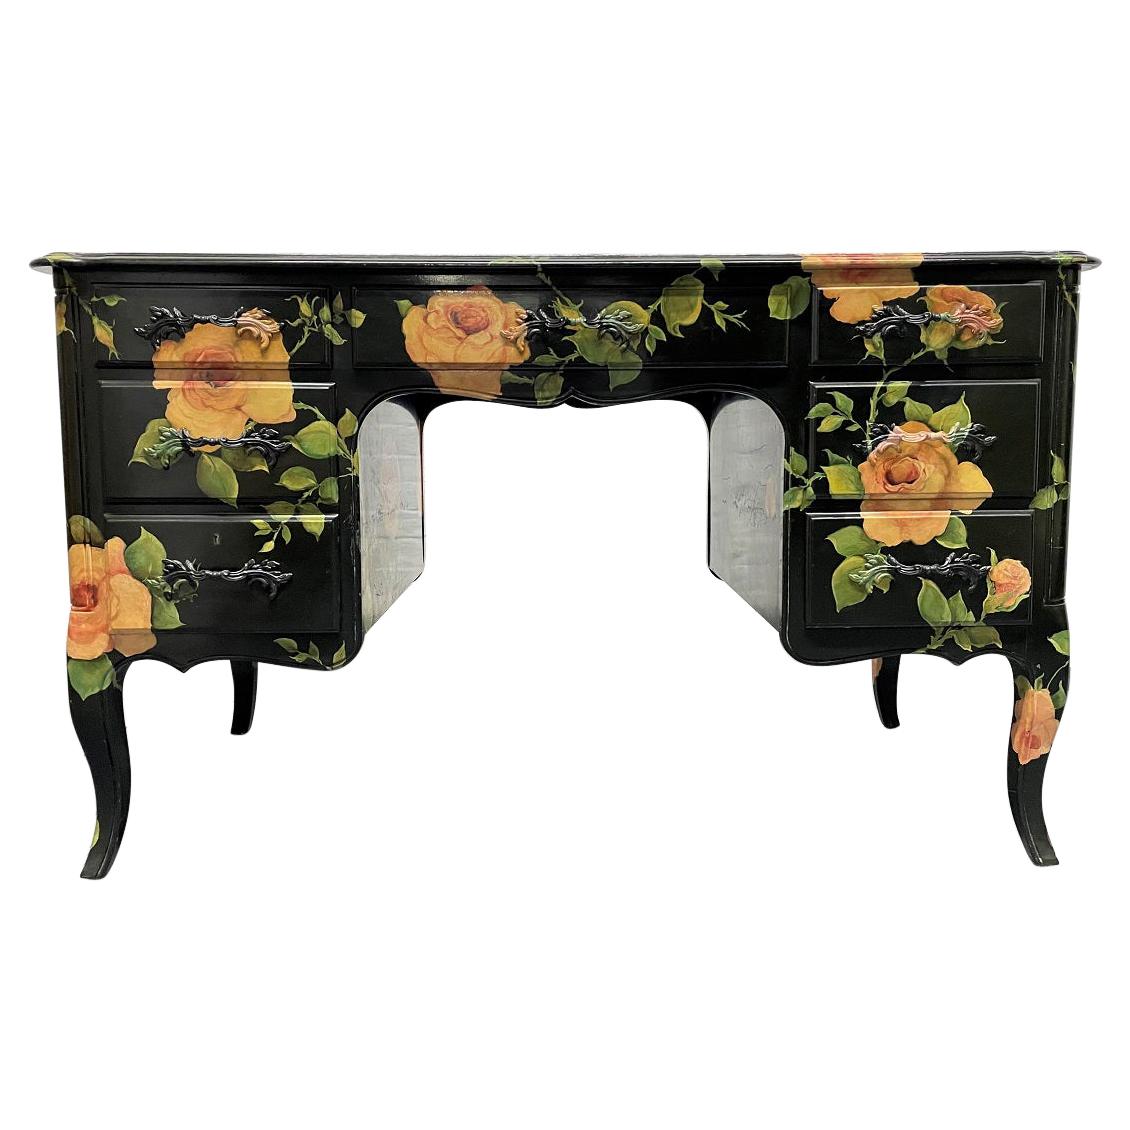 Isabel O'neil Attributed. Hand Painted Kneehole Desk